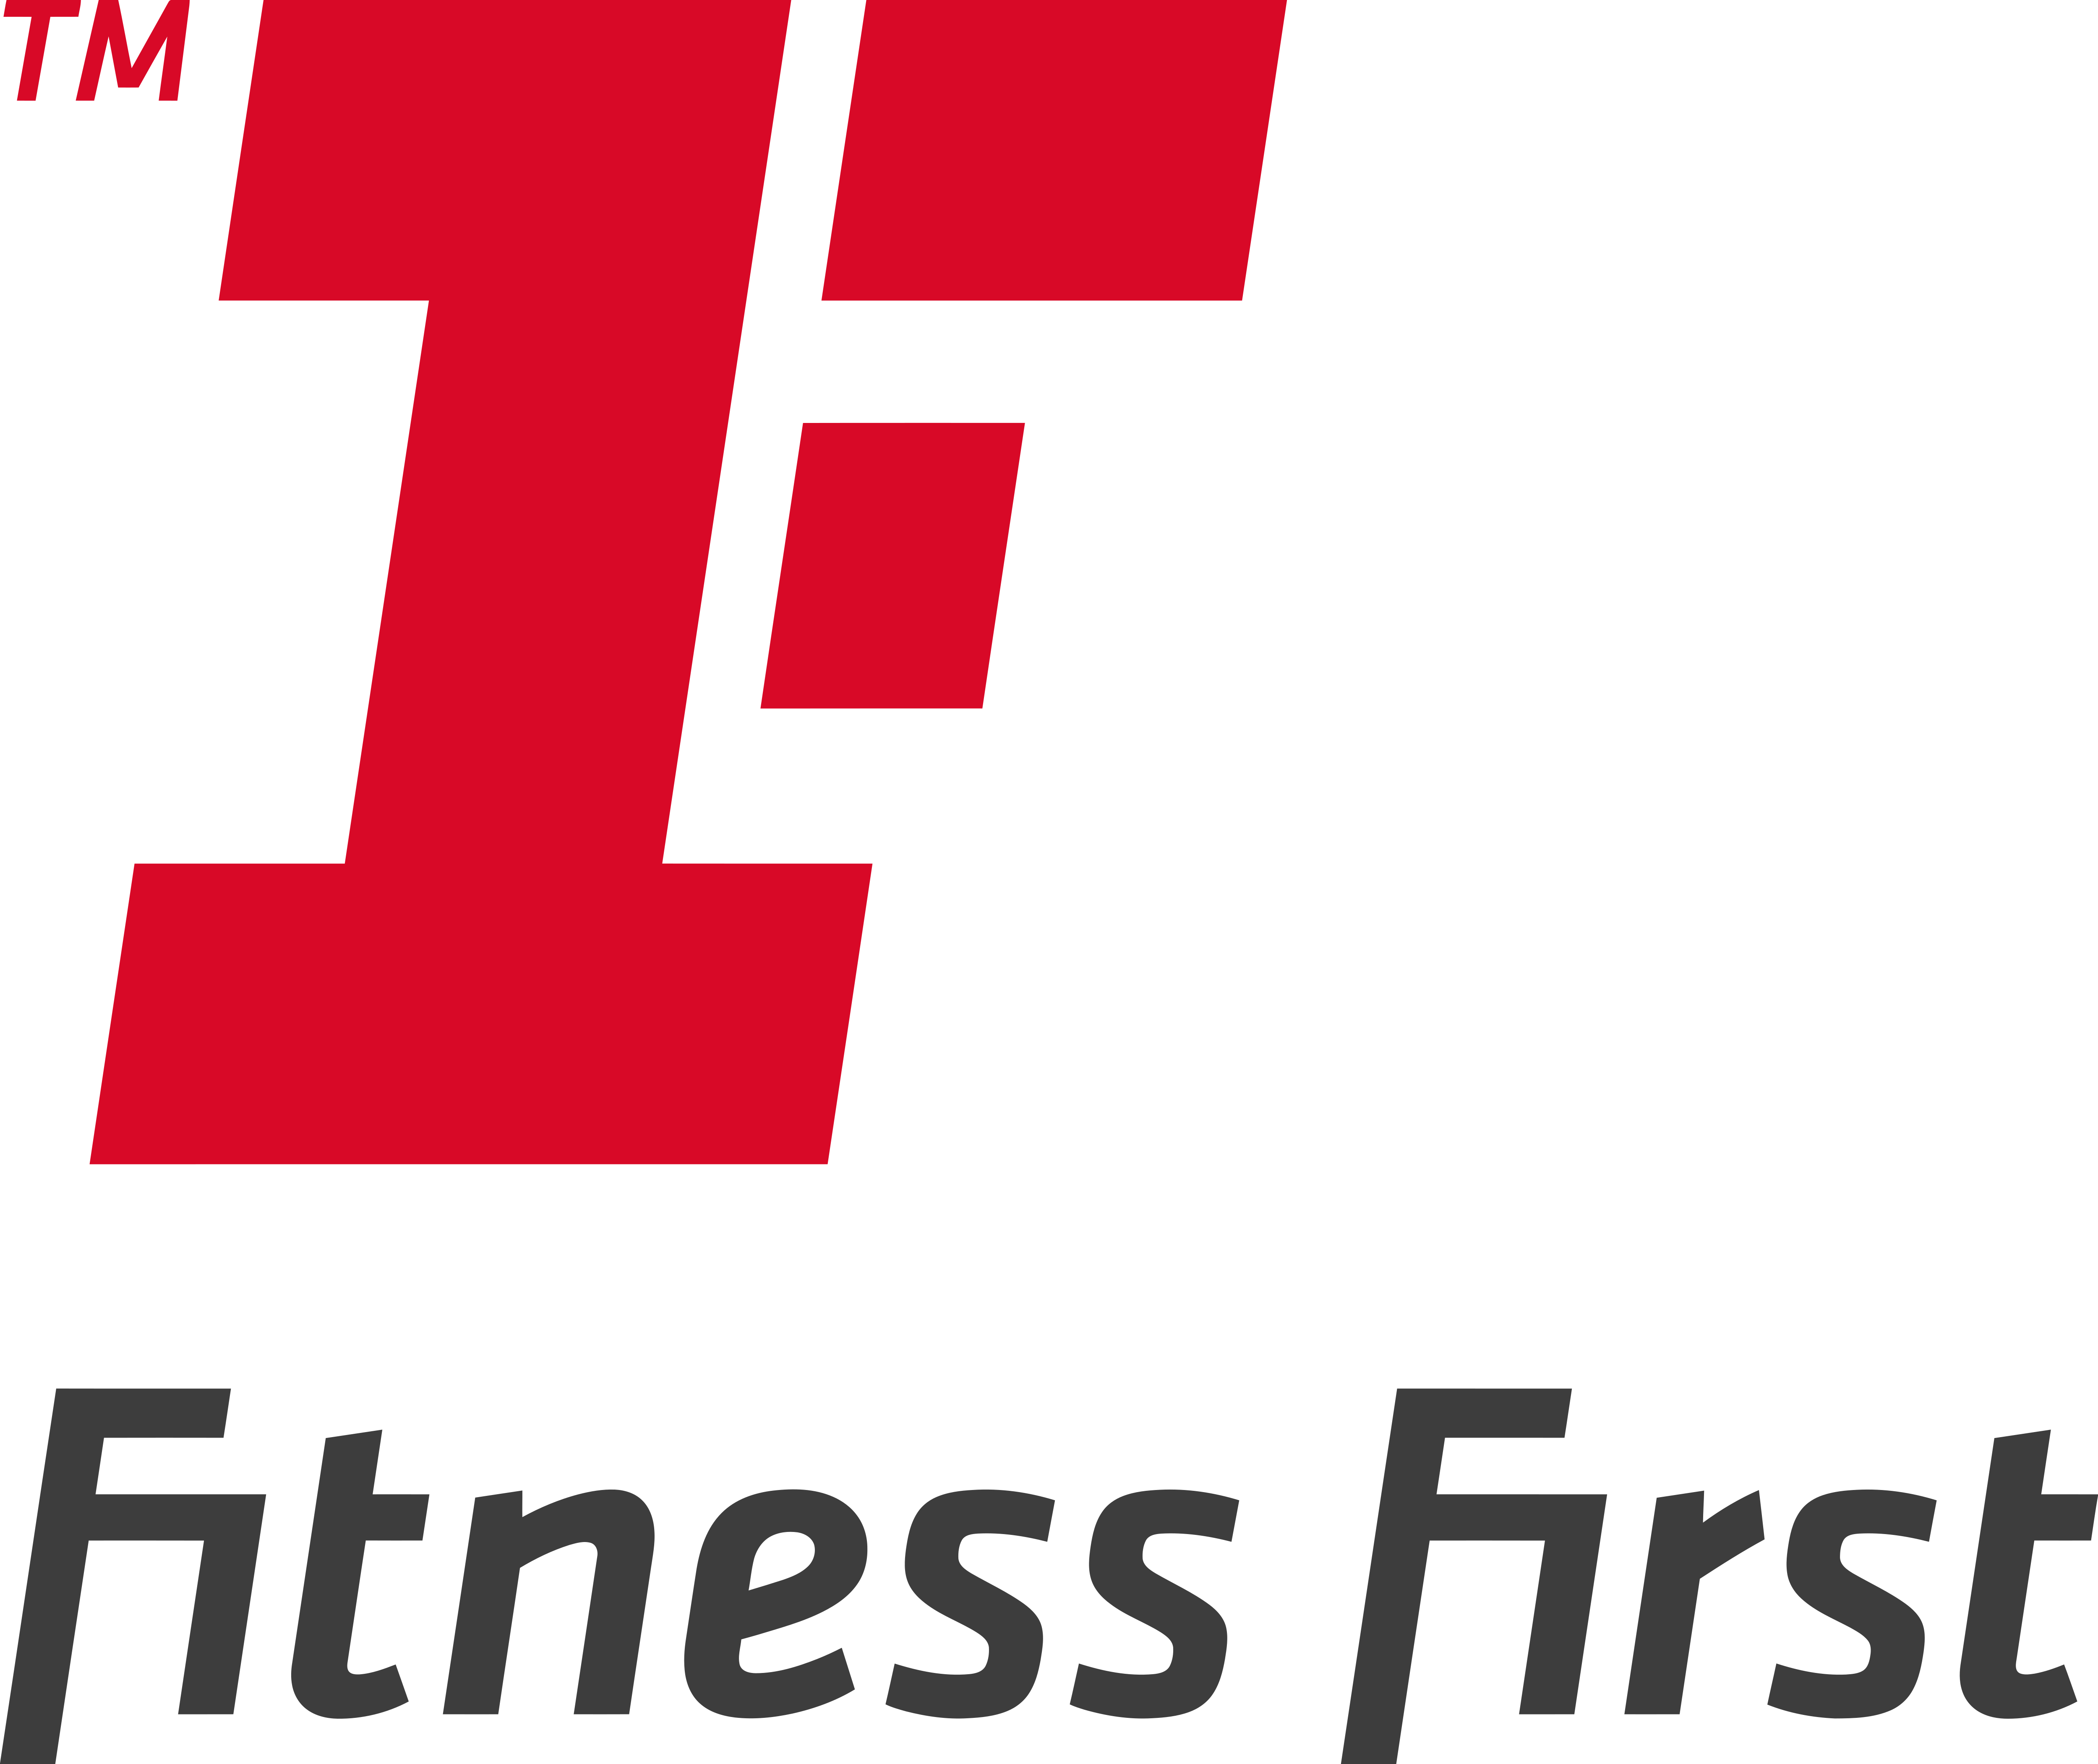 Fitness First - Logos Download